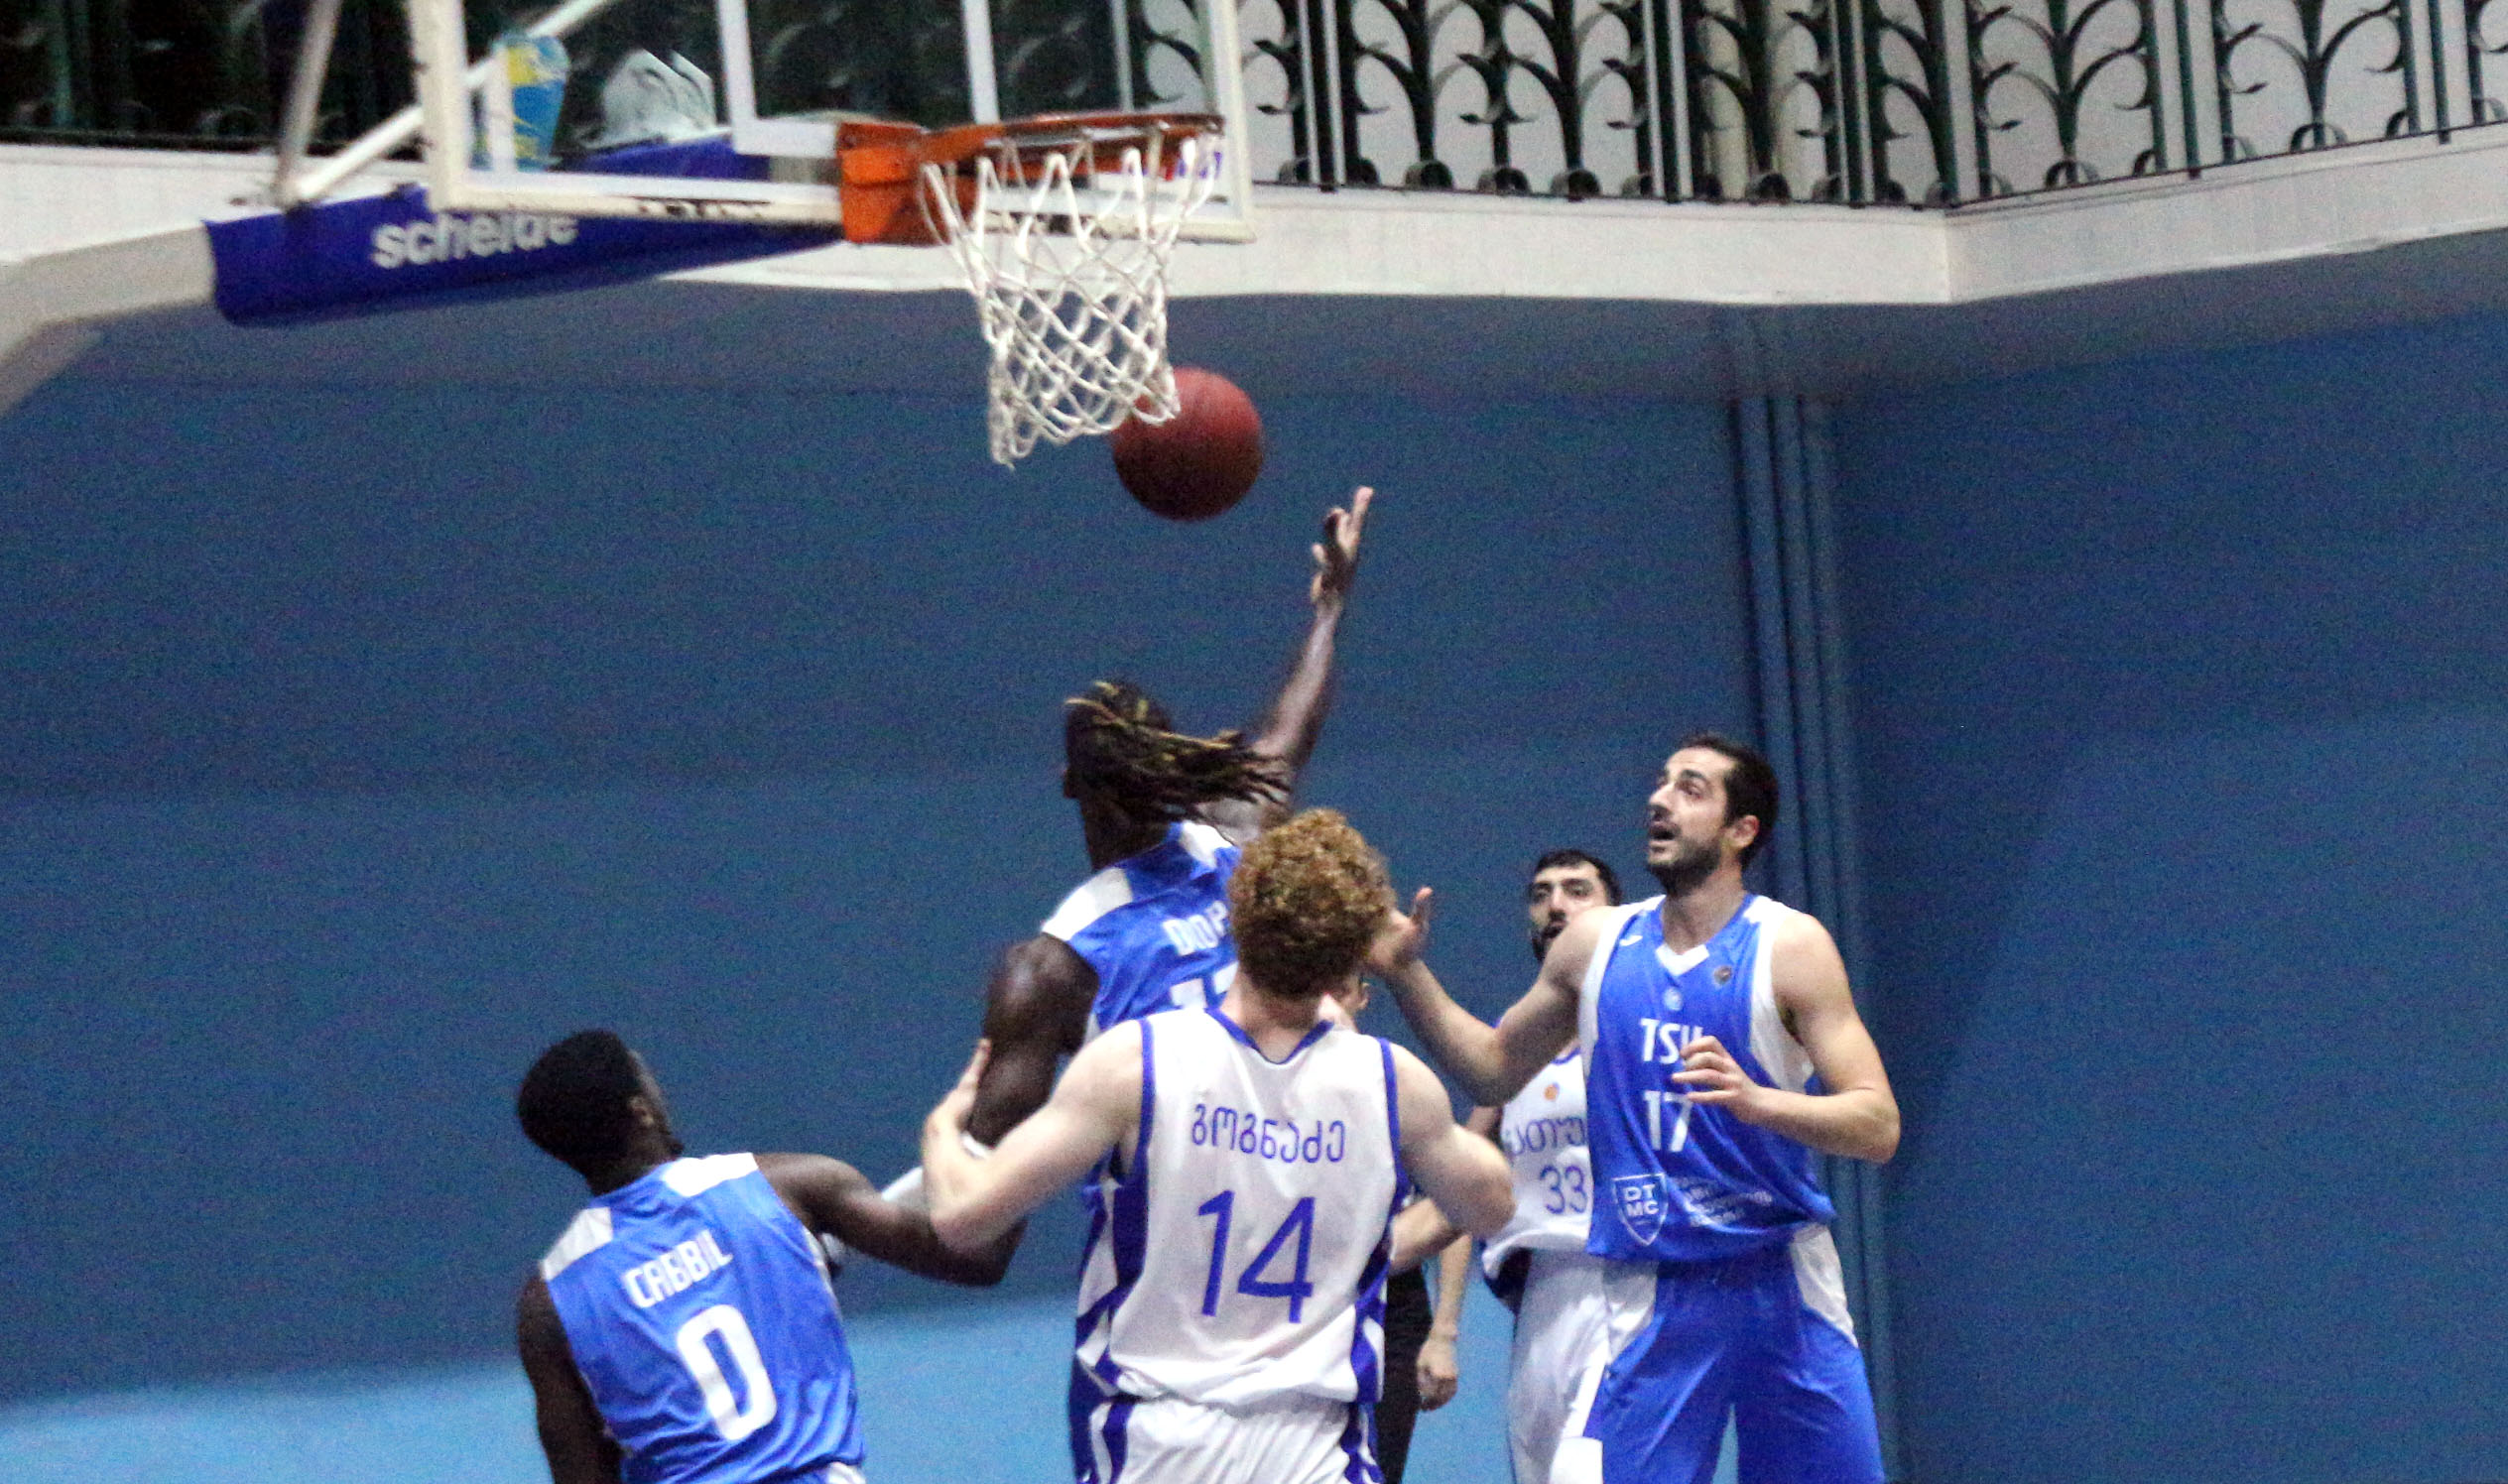 TSU defeated Batumi after losing by 20 points in the first half